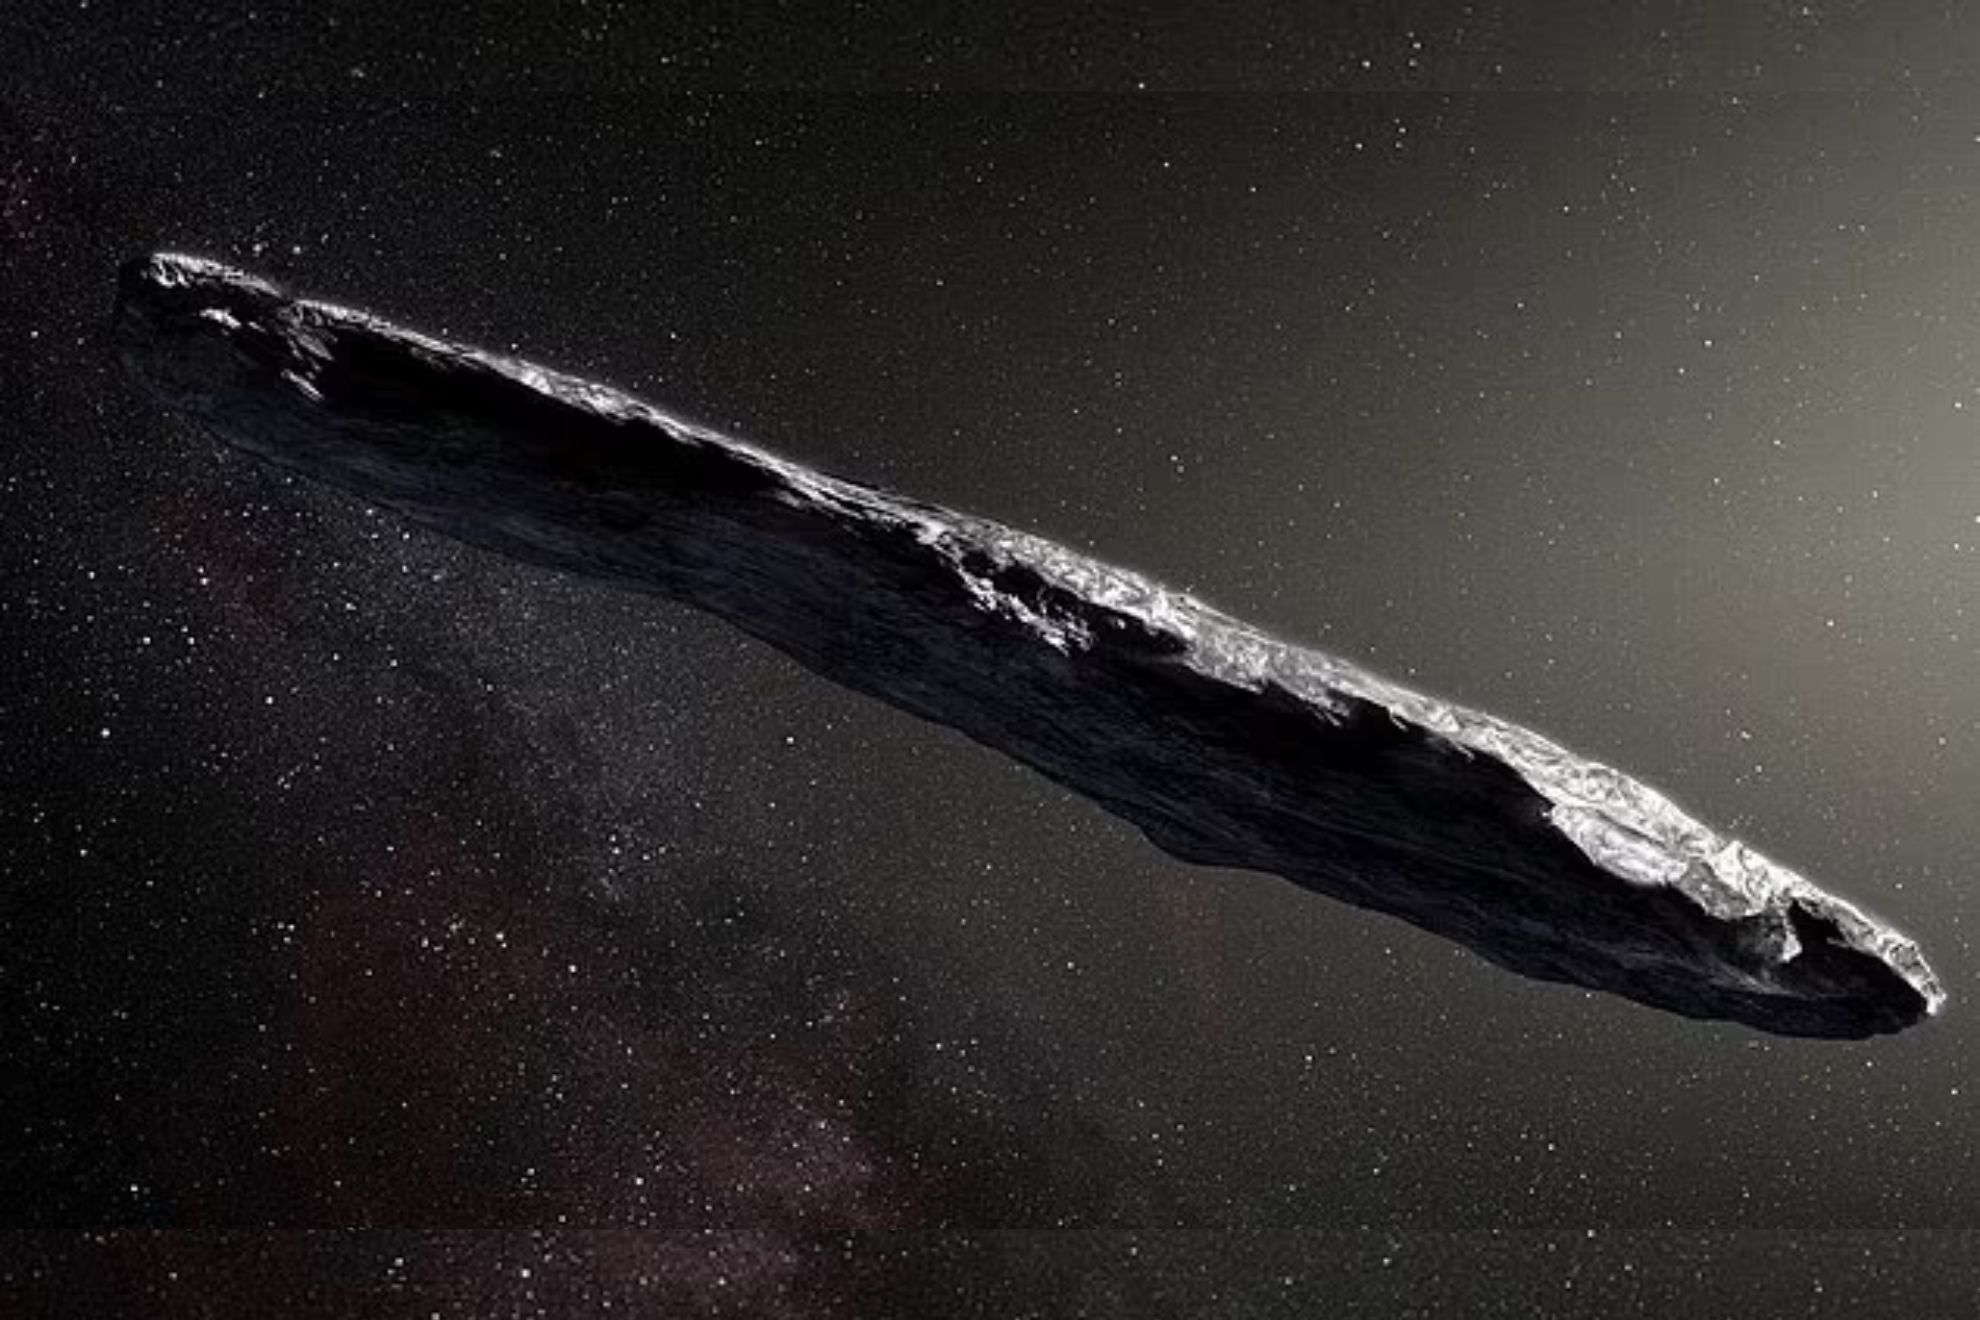 Scientists finally solve the mysterious case of Oumuamua